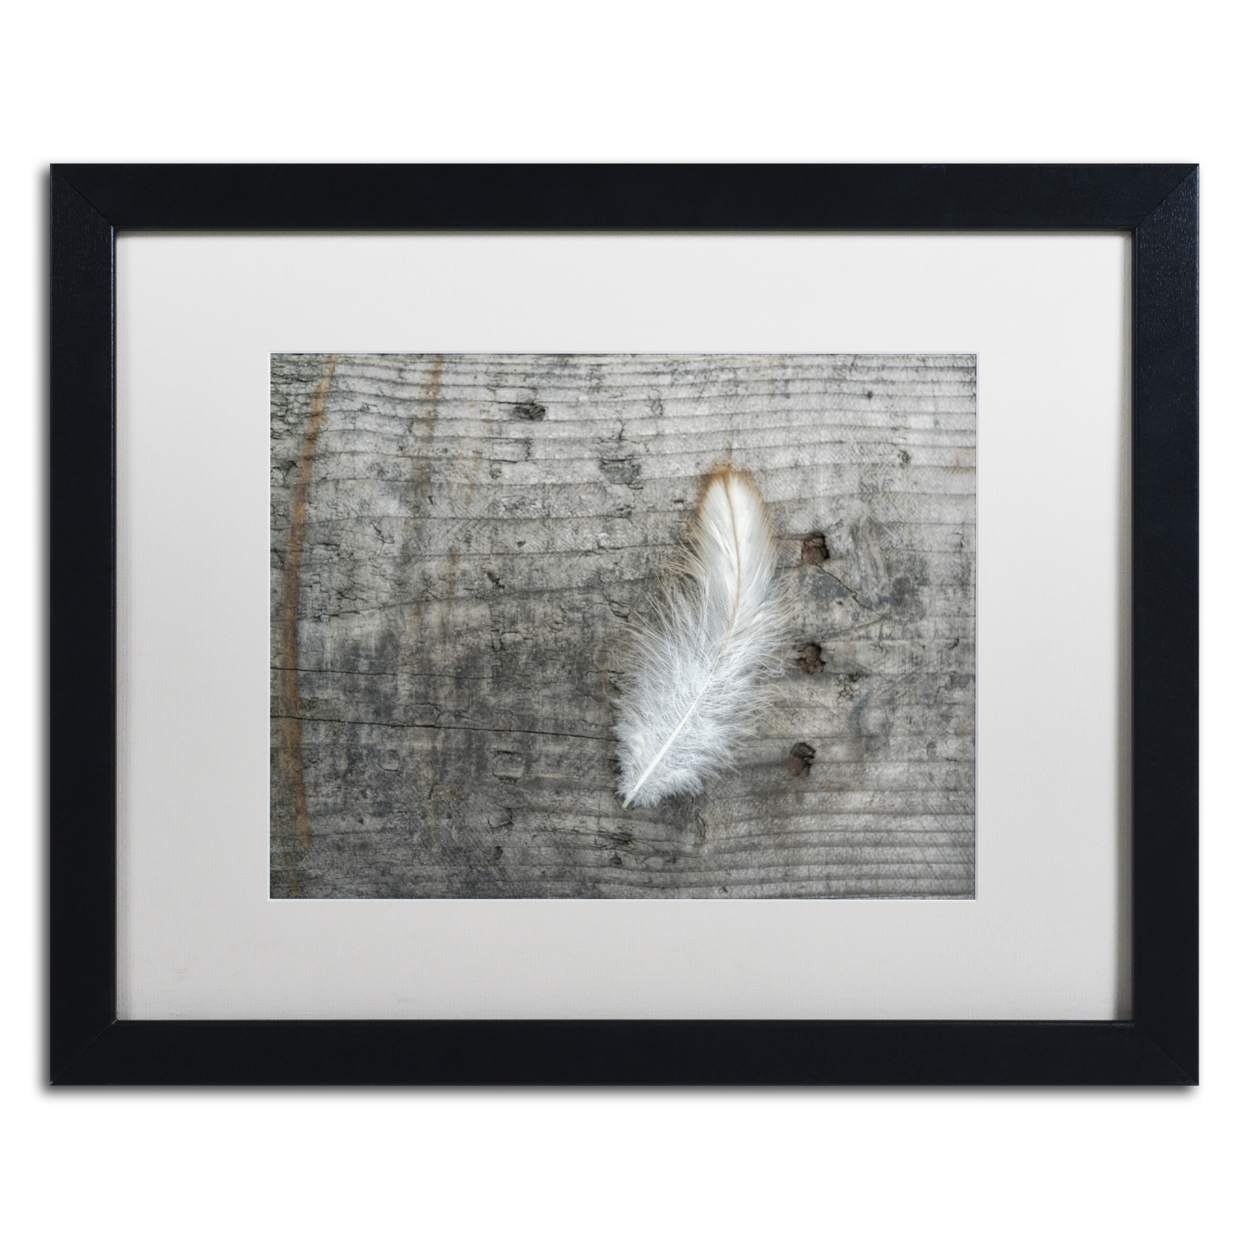 Cora Niele 'Feather On Rough Wood' Black Wooden Framed Art 18 X 22 Inches